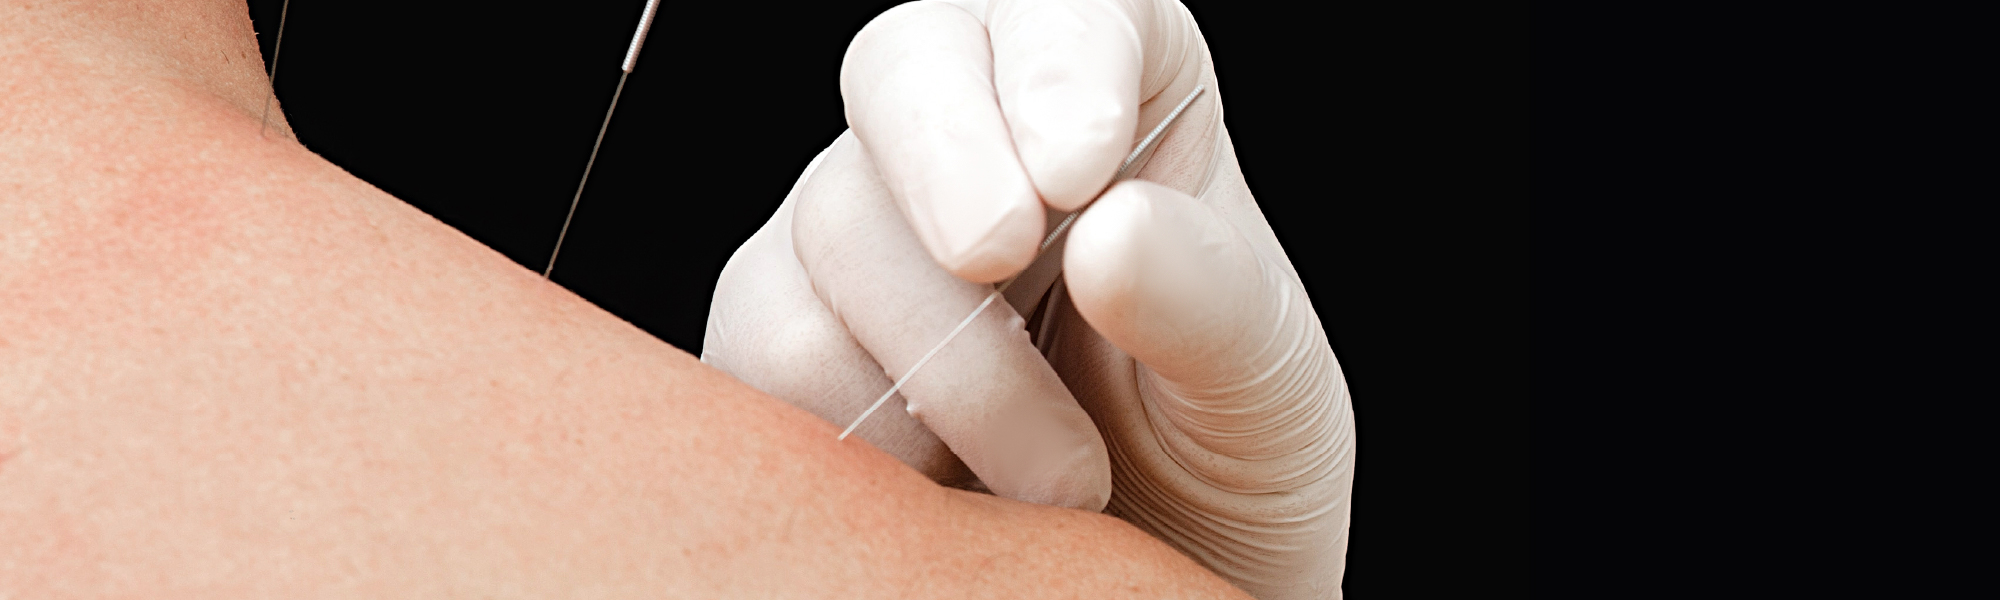 acupuncture needle being inserted